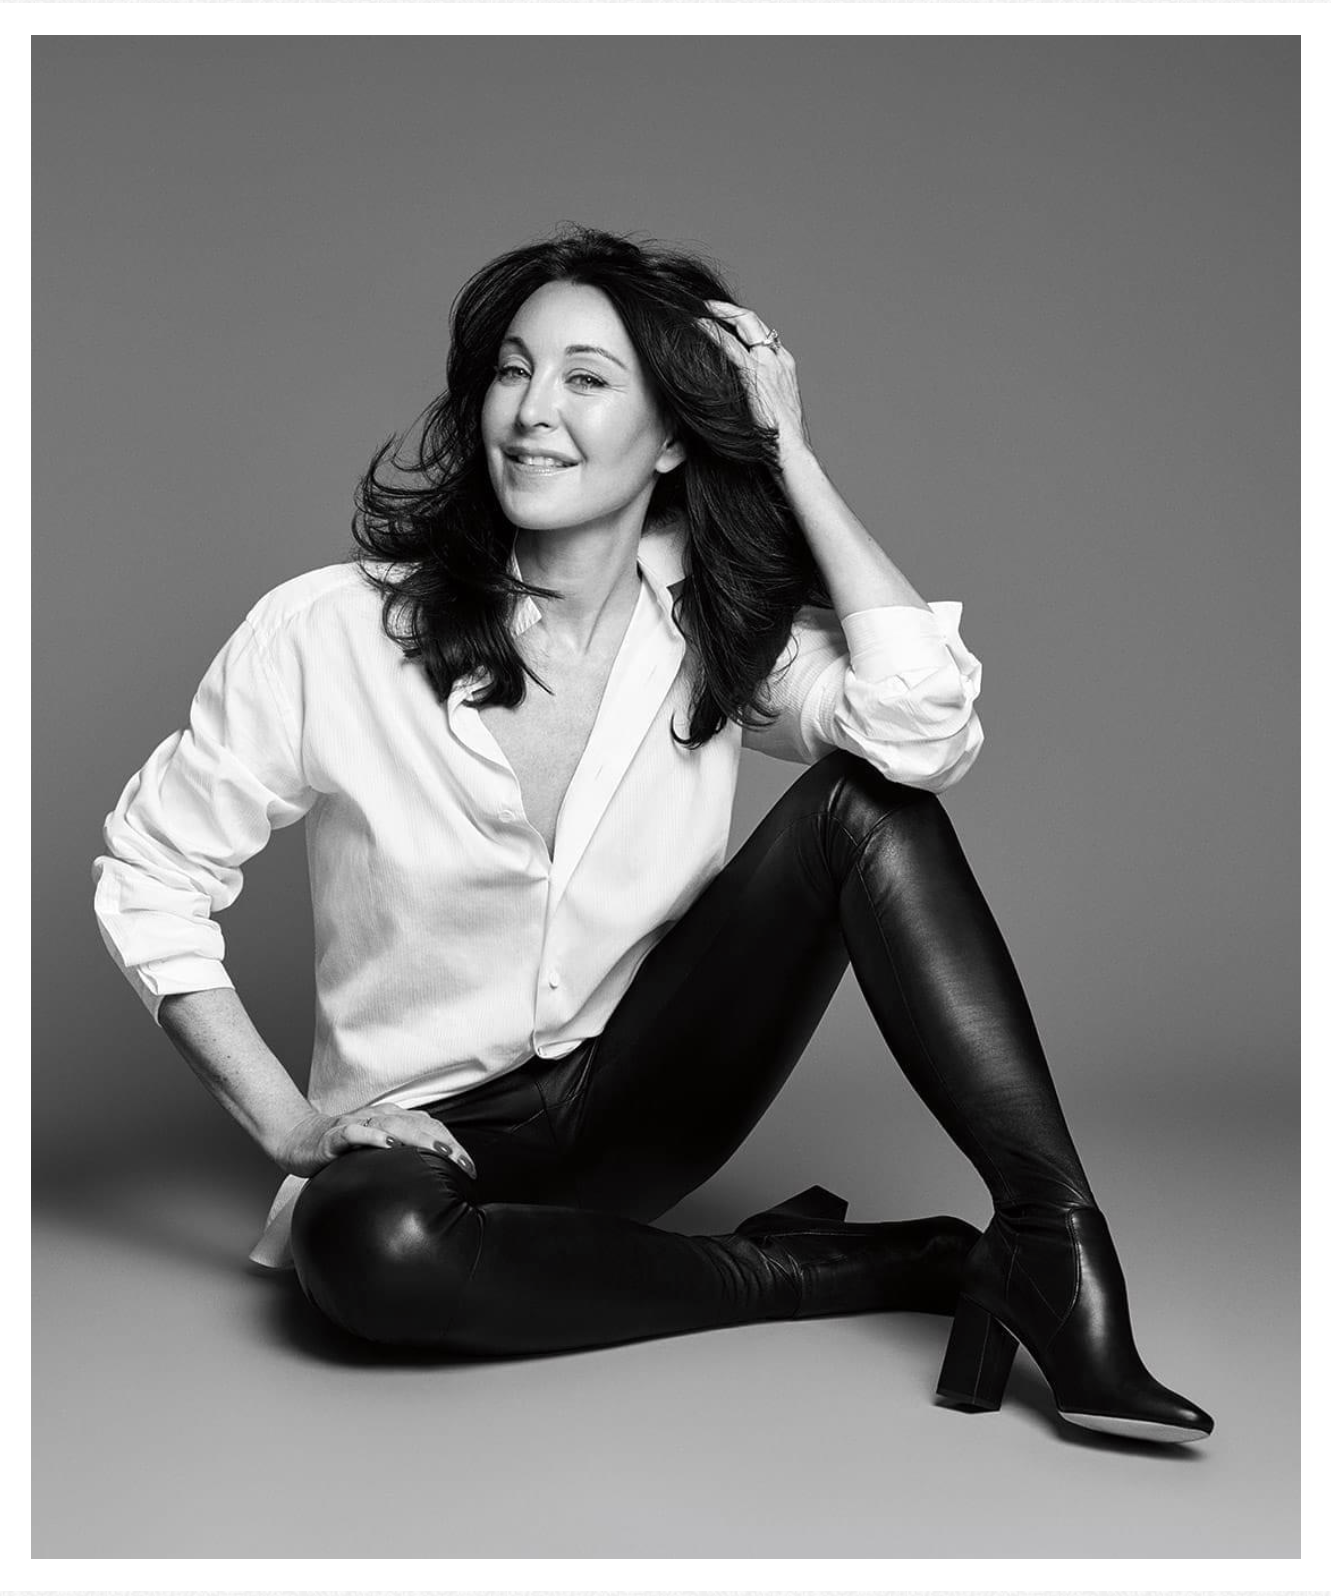 Tamara Mellon founder of Tamara Mellon shoes like Frontline heels which are a celebrity favorite